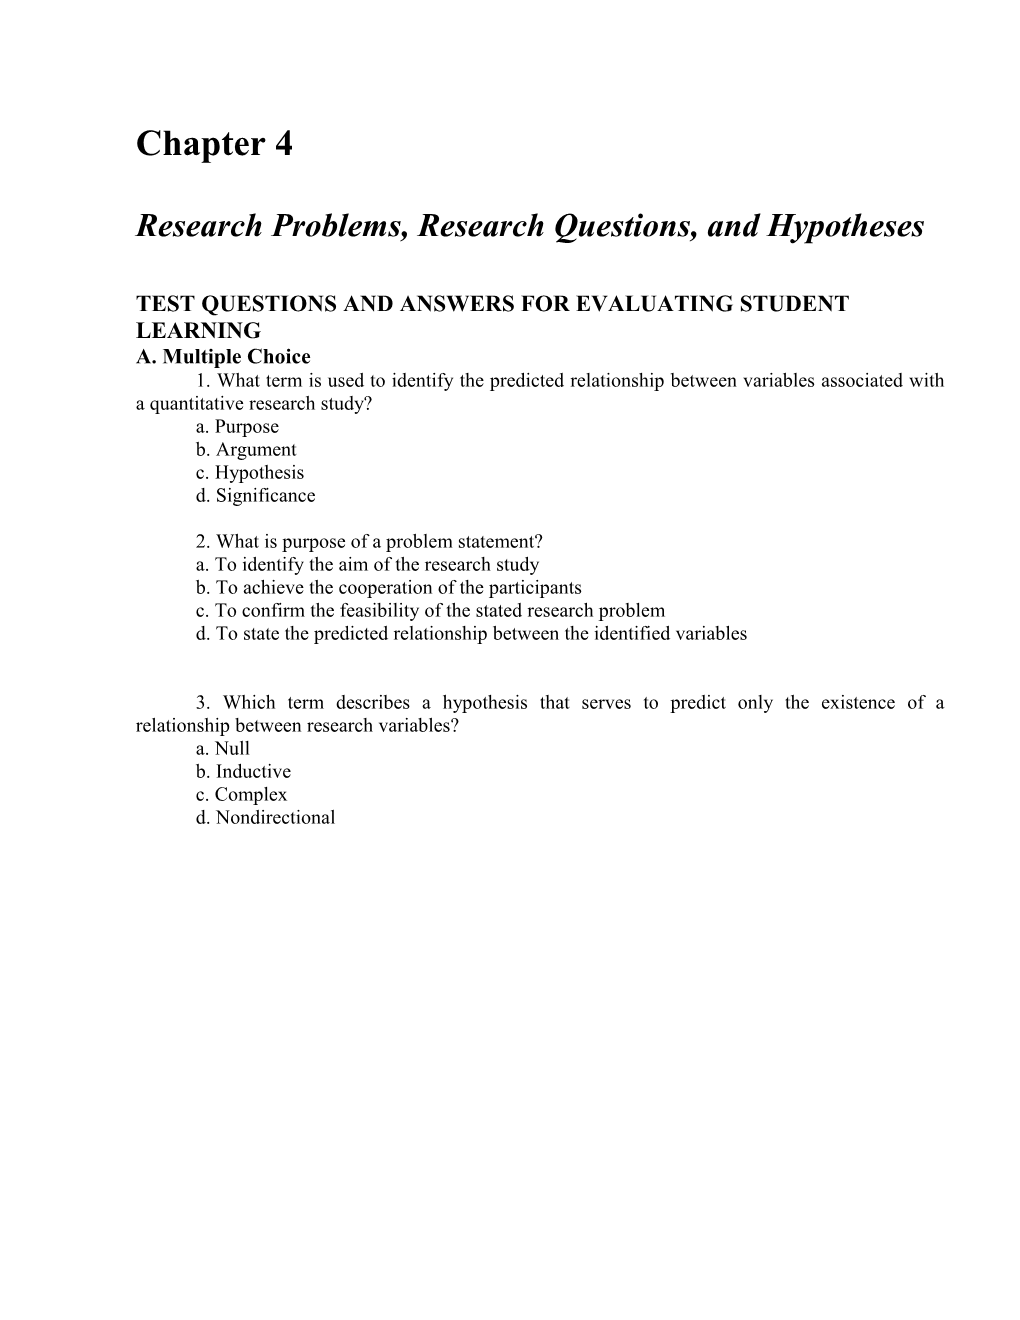 Research Problems, Research Questions, and Hypotheses